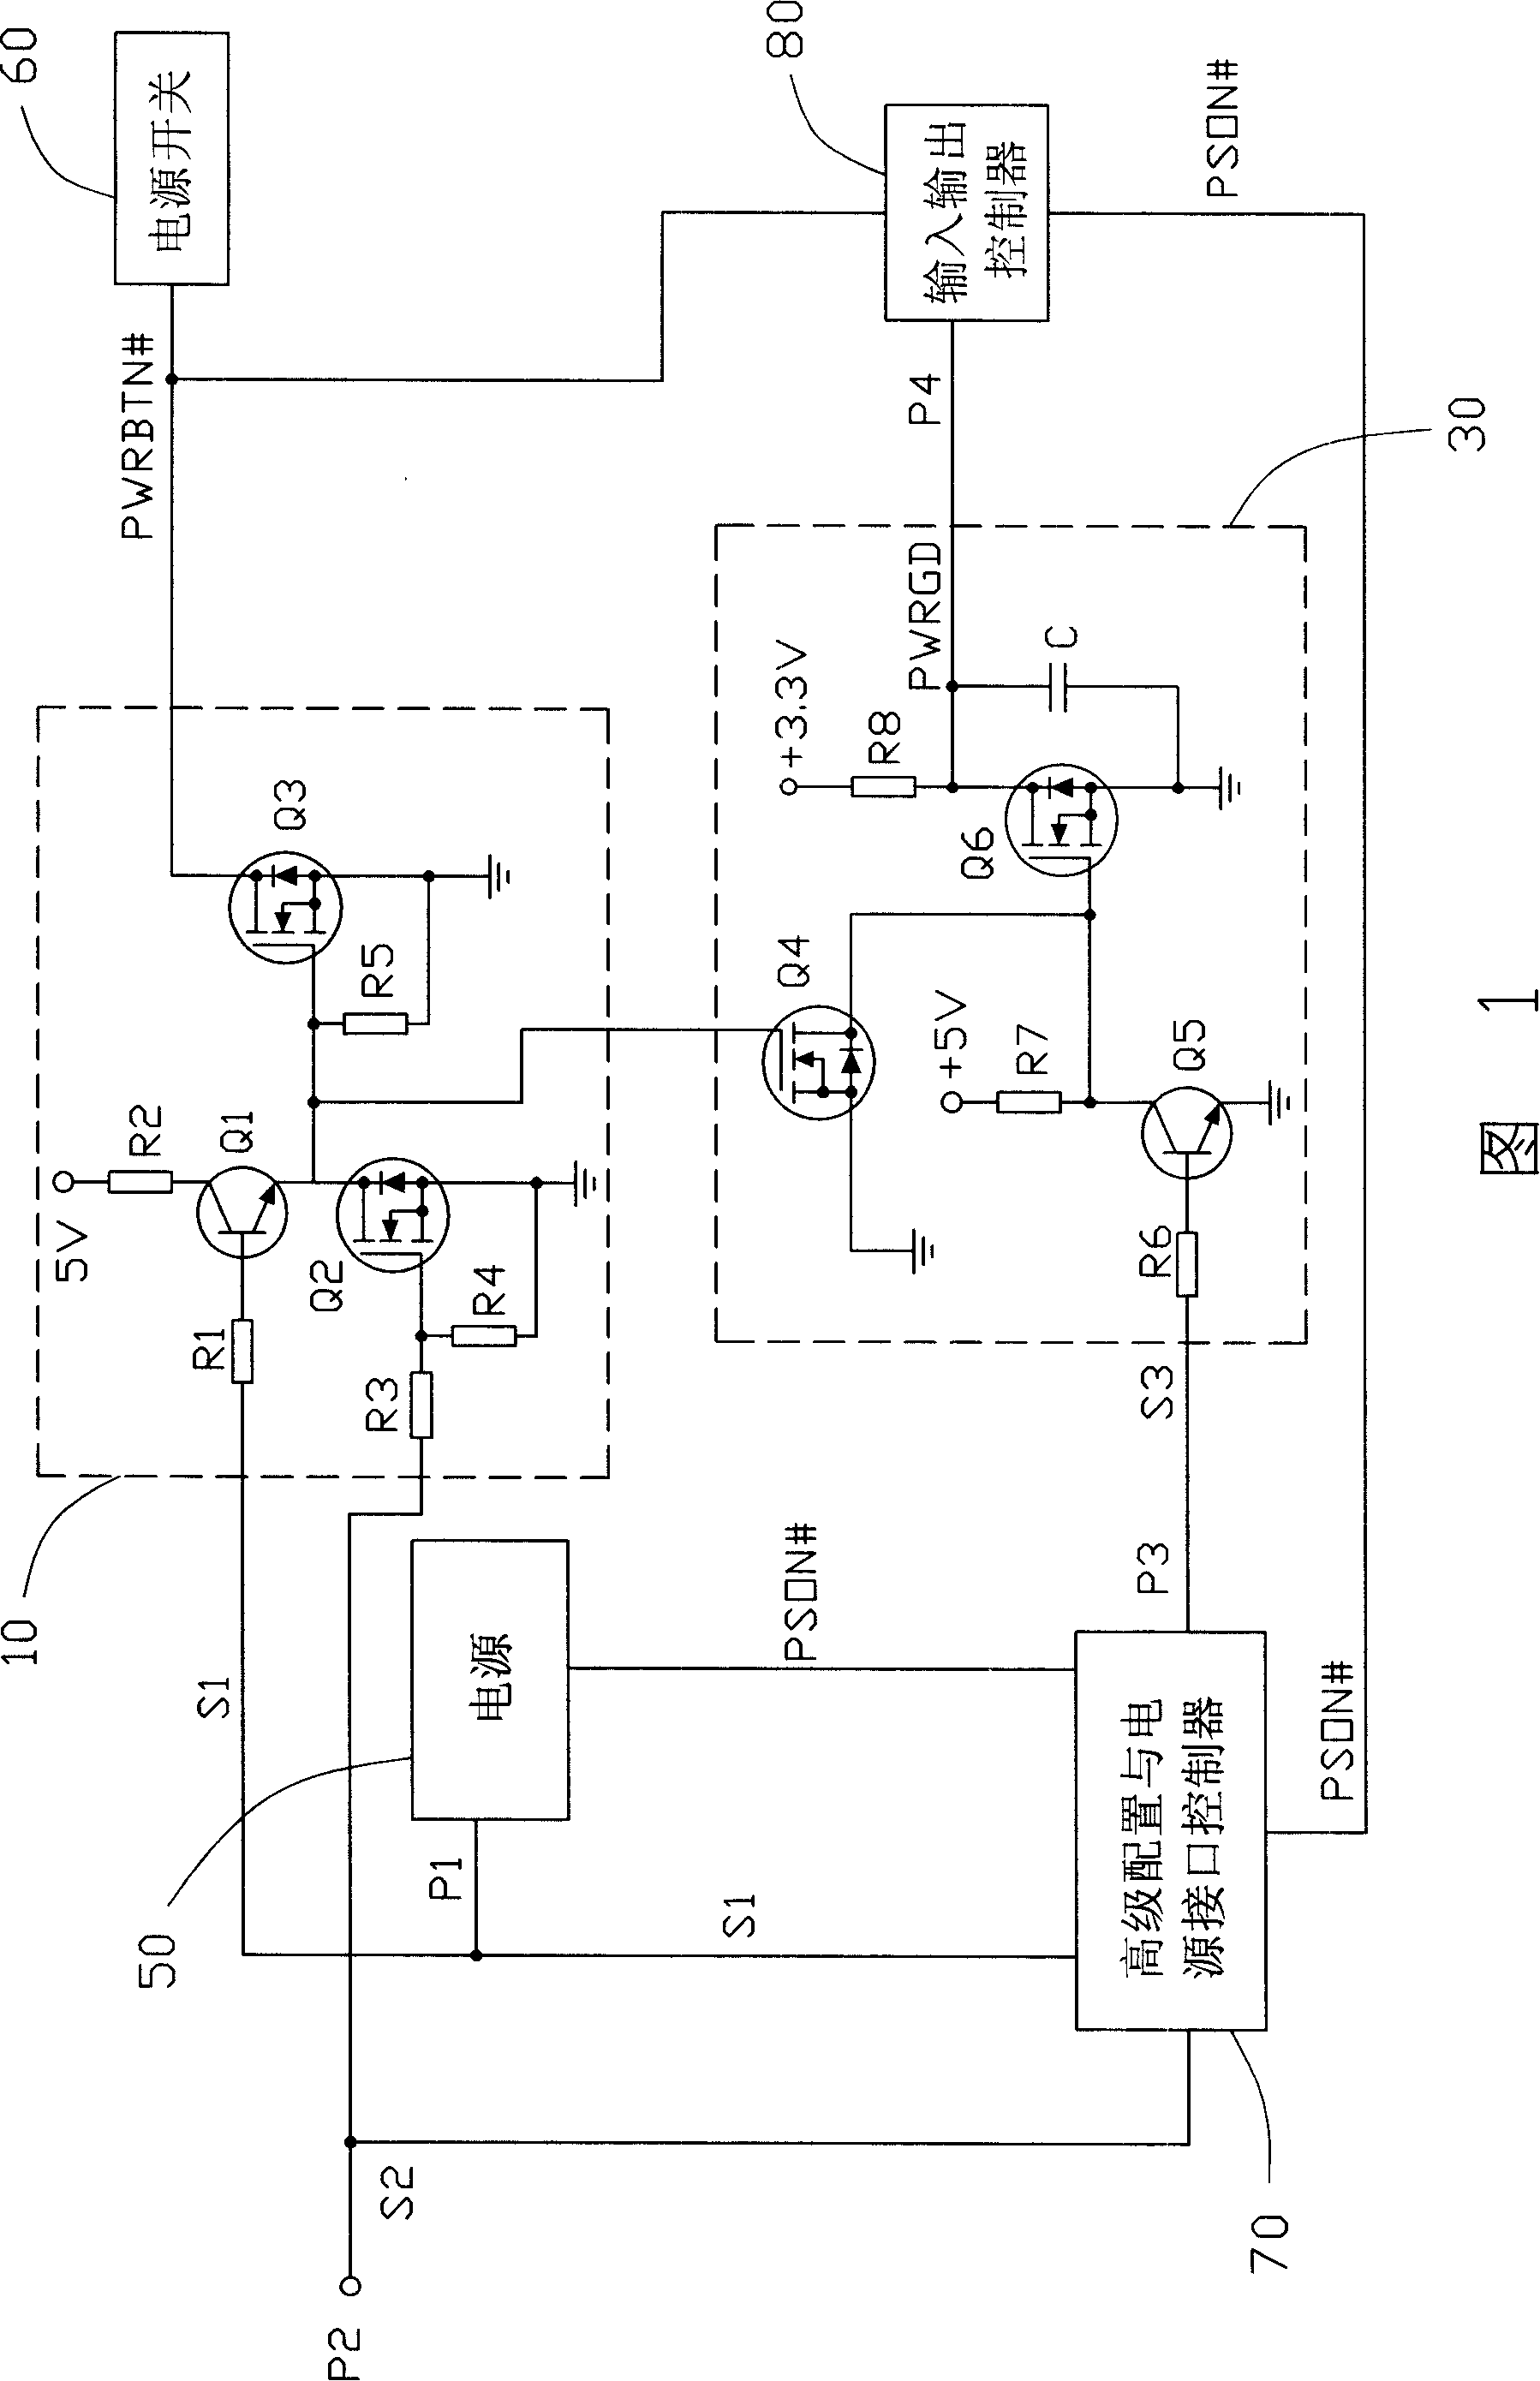 Main board power supply protection circuit